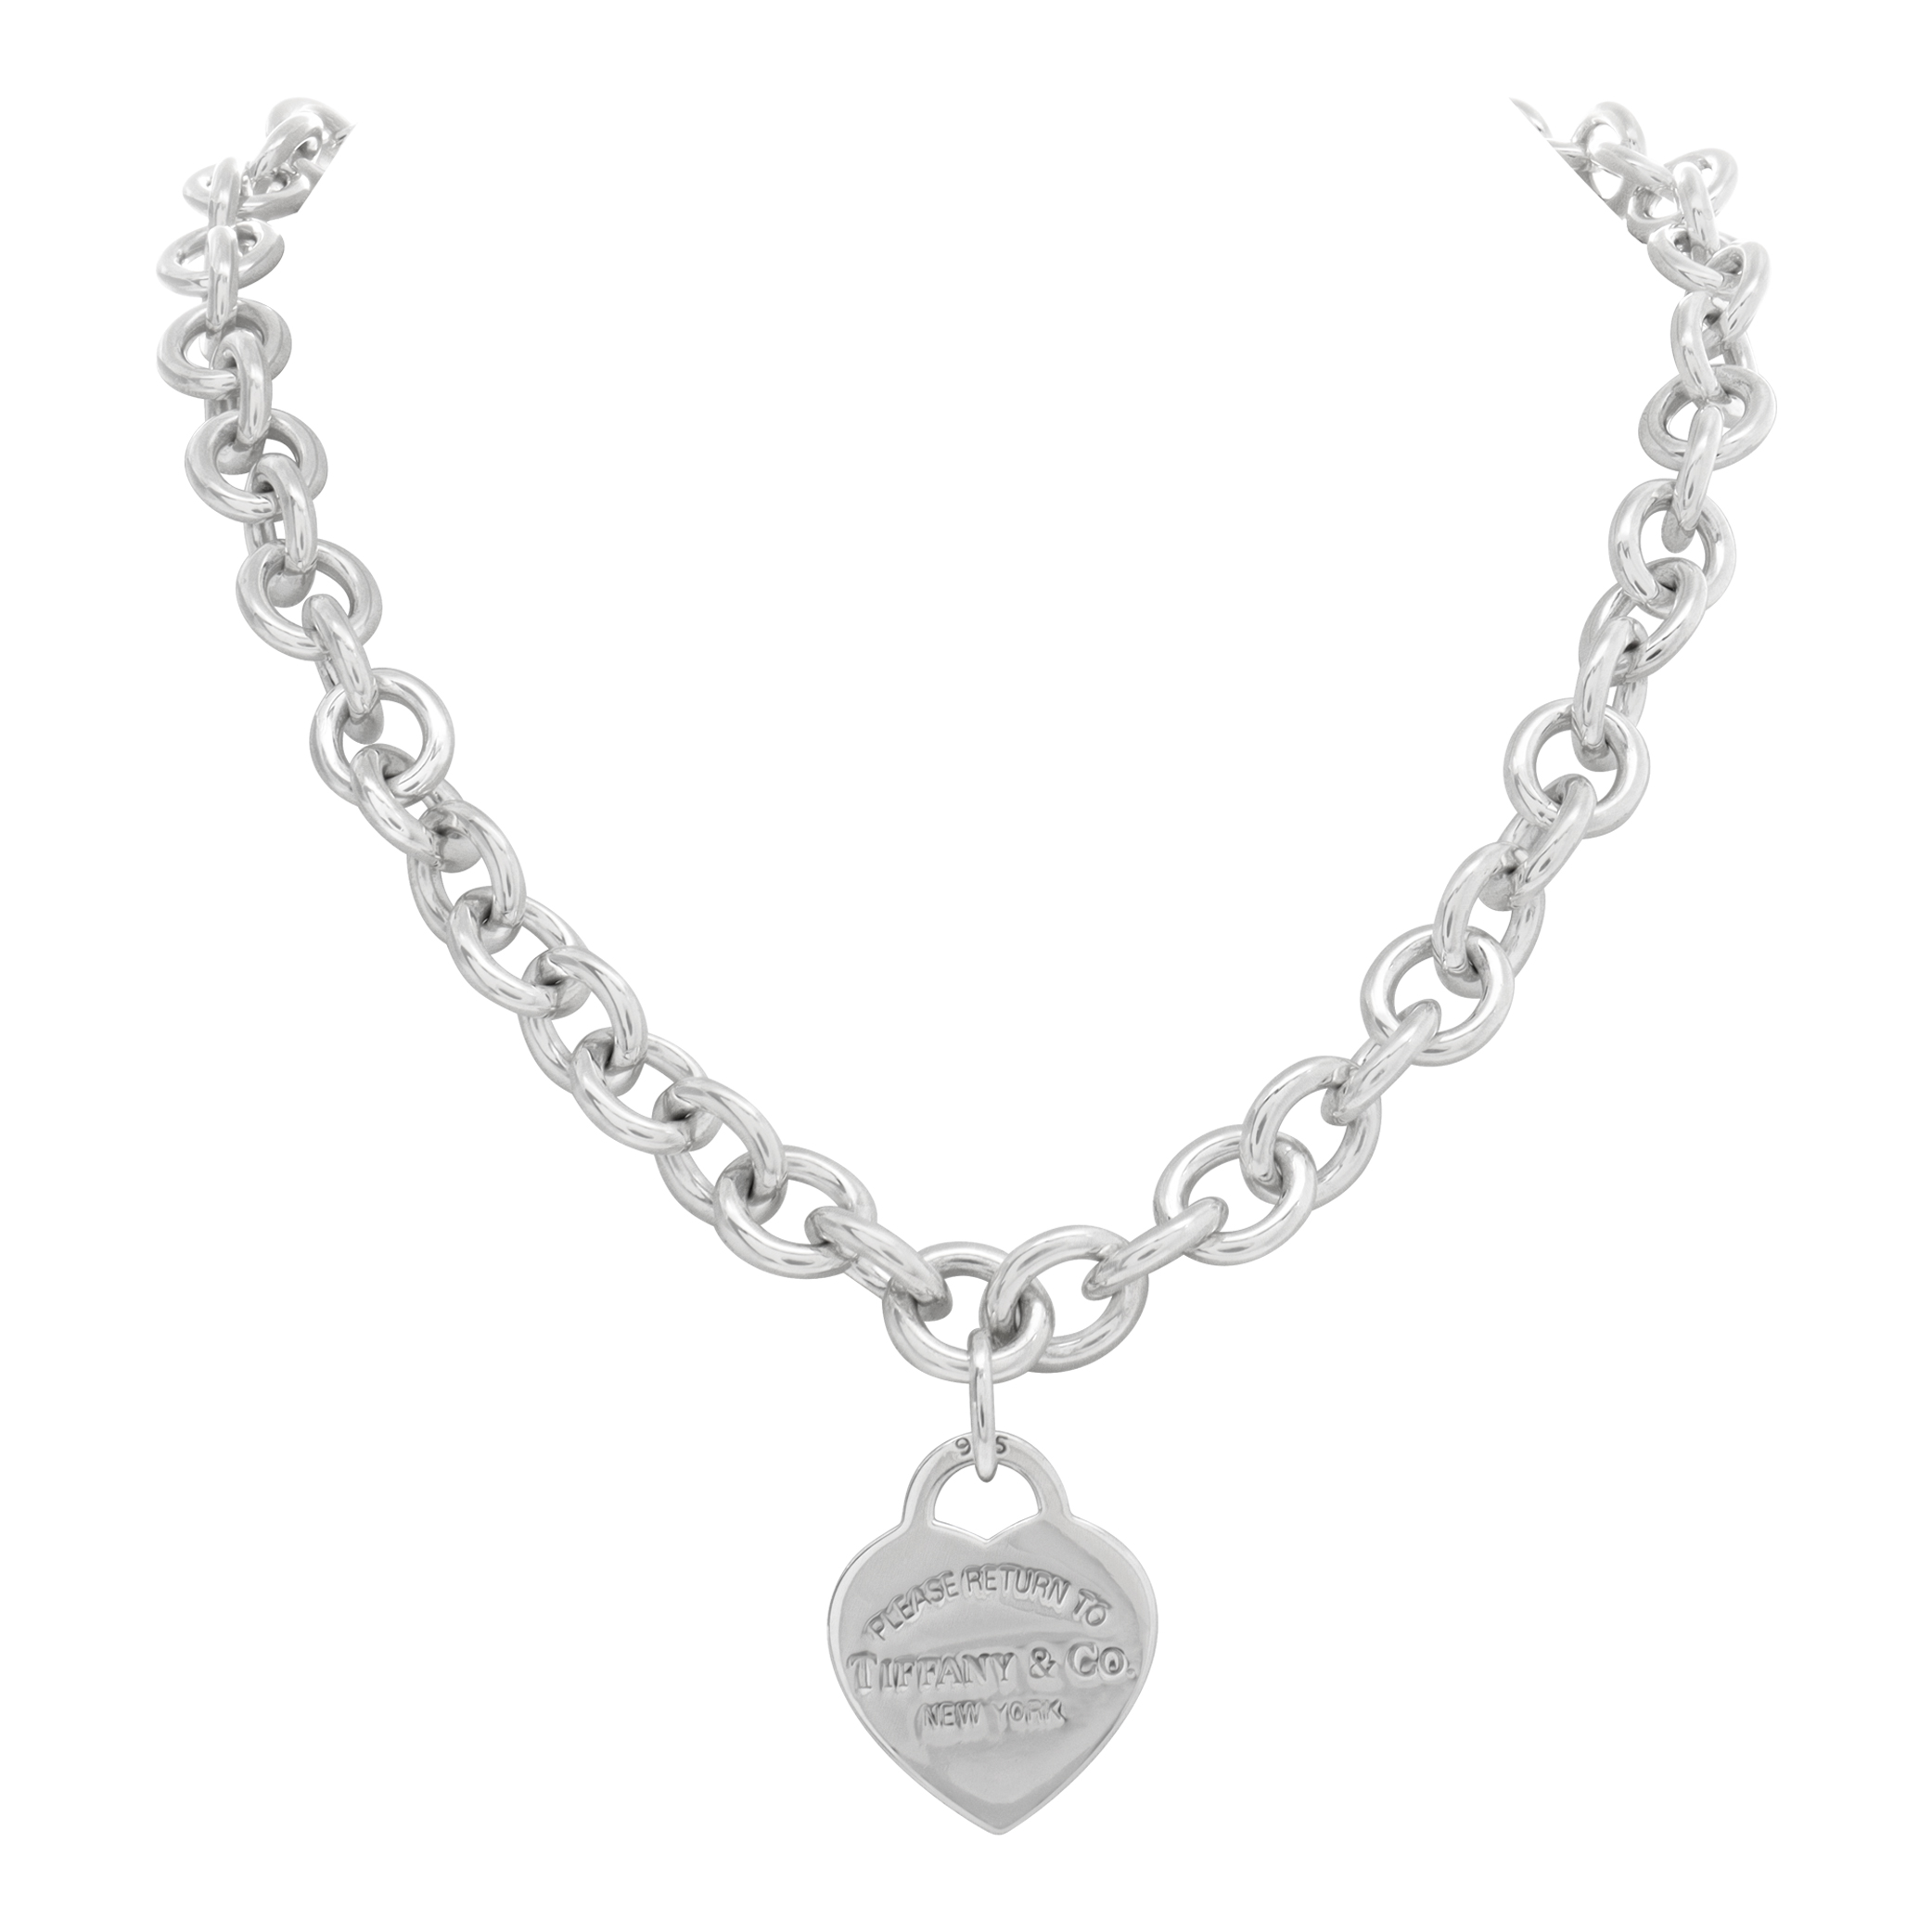 Tiffany & Co. sterling silver chain necklace "RETURN TO TIFFANY" heart tag pendant